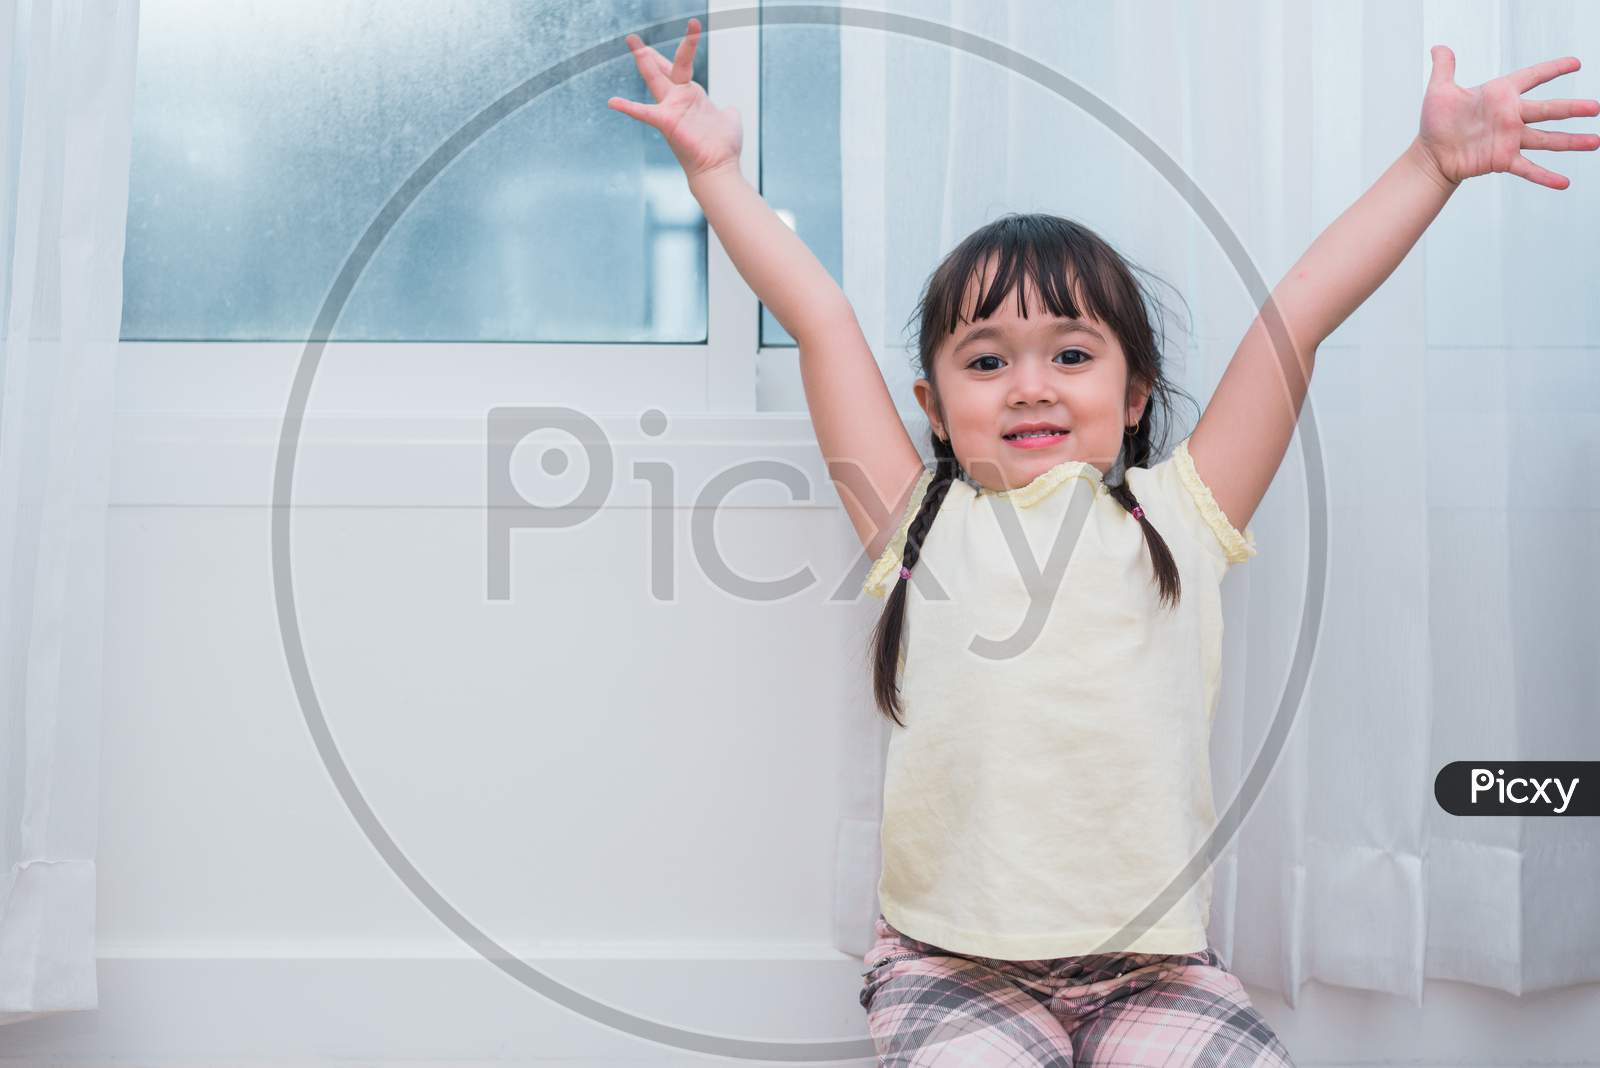 Little Girl Raise Hands With Happy Gesture Mood. Kids Play And Back To School Concept. Education And Portrait Theme. People And Lifestyle Theme.